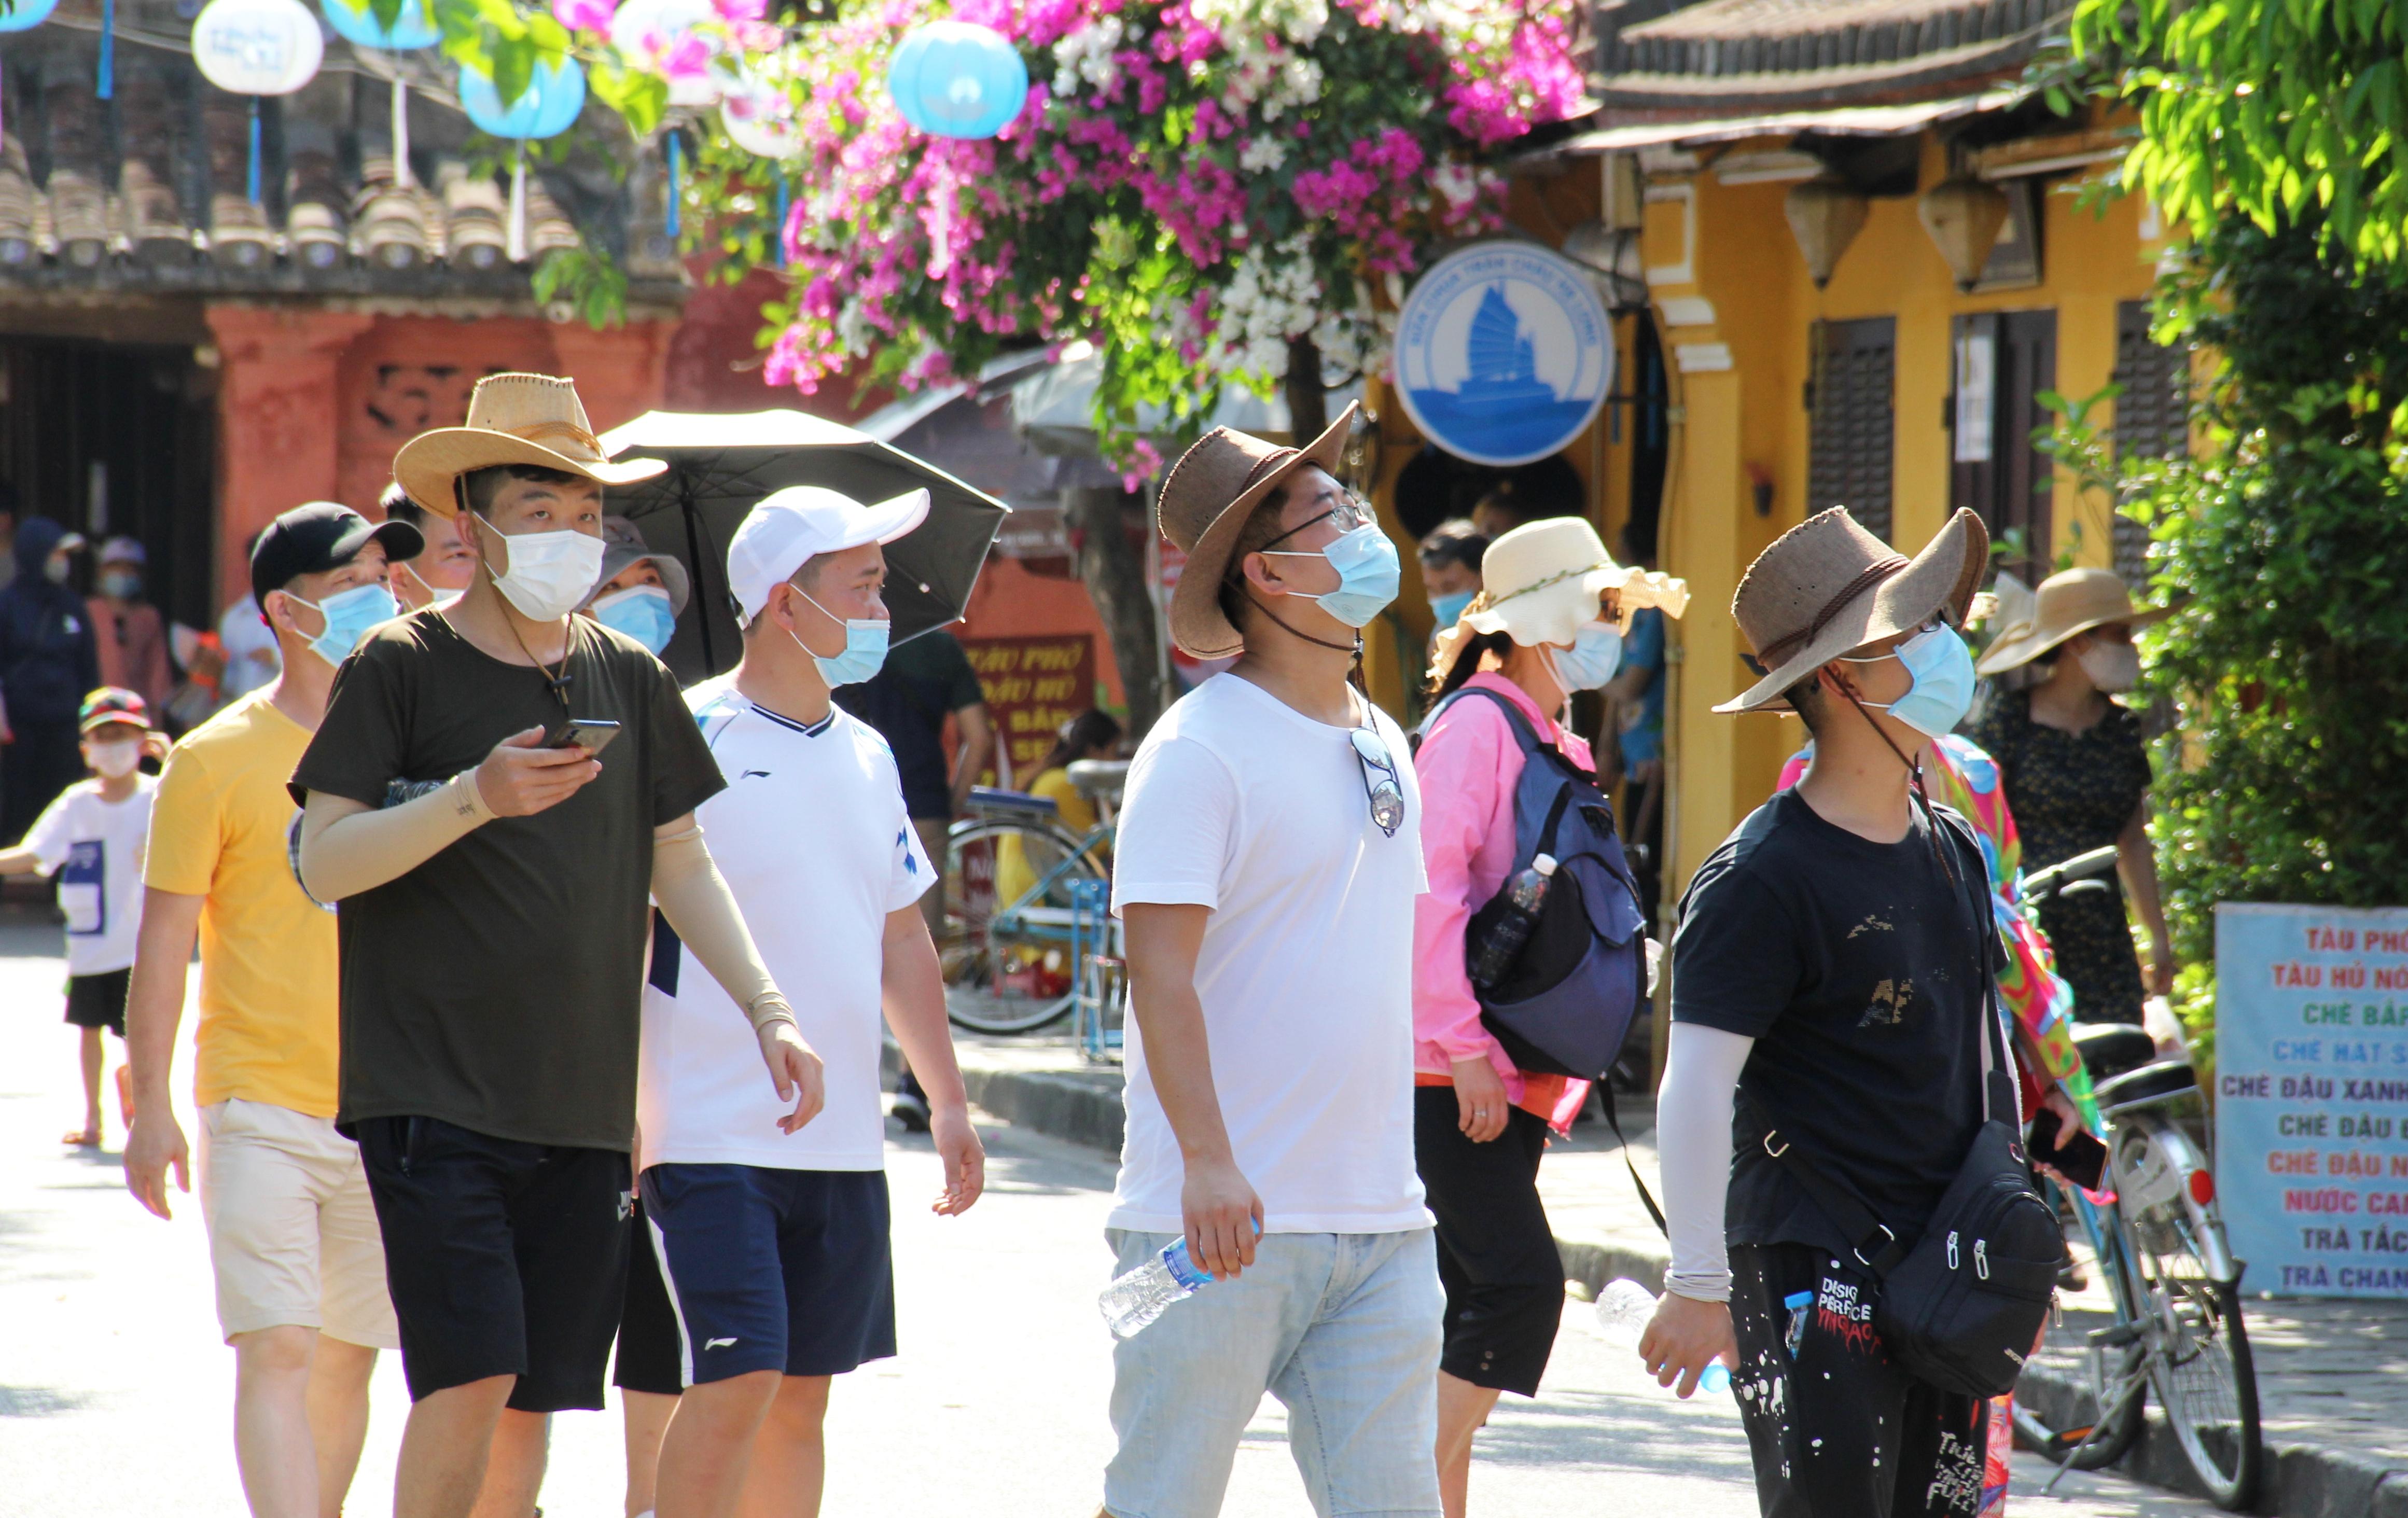 How are tourists classified in Vietnam?